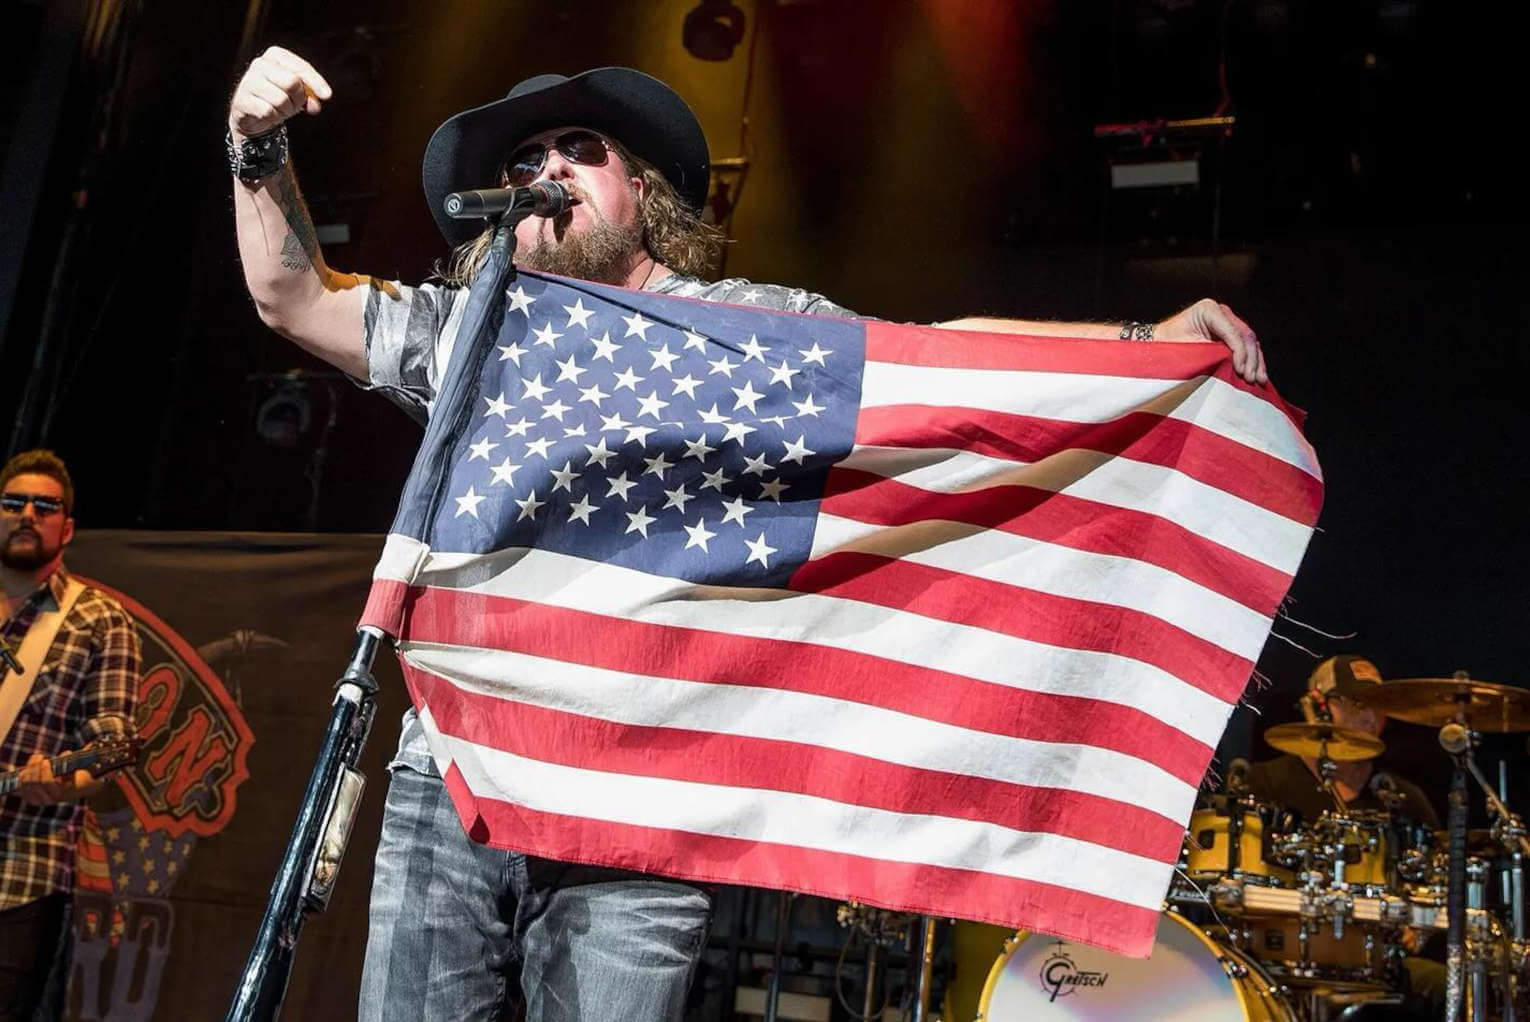 Country Star Colt Ford Cheats Death Twice: ‘The Lord Had More for Me’